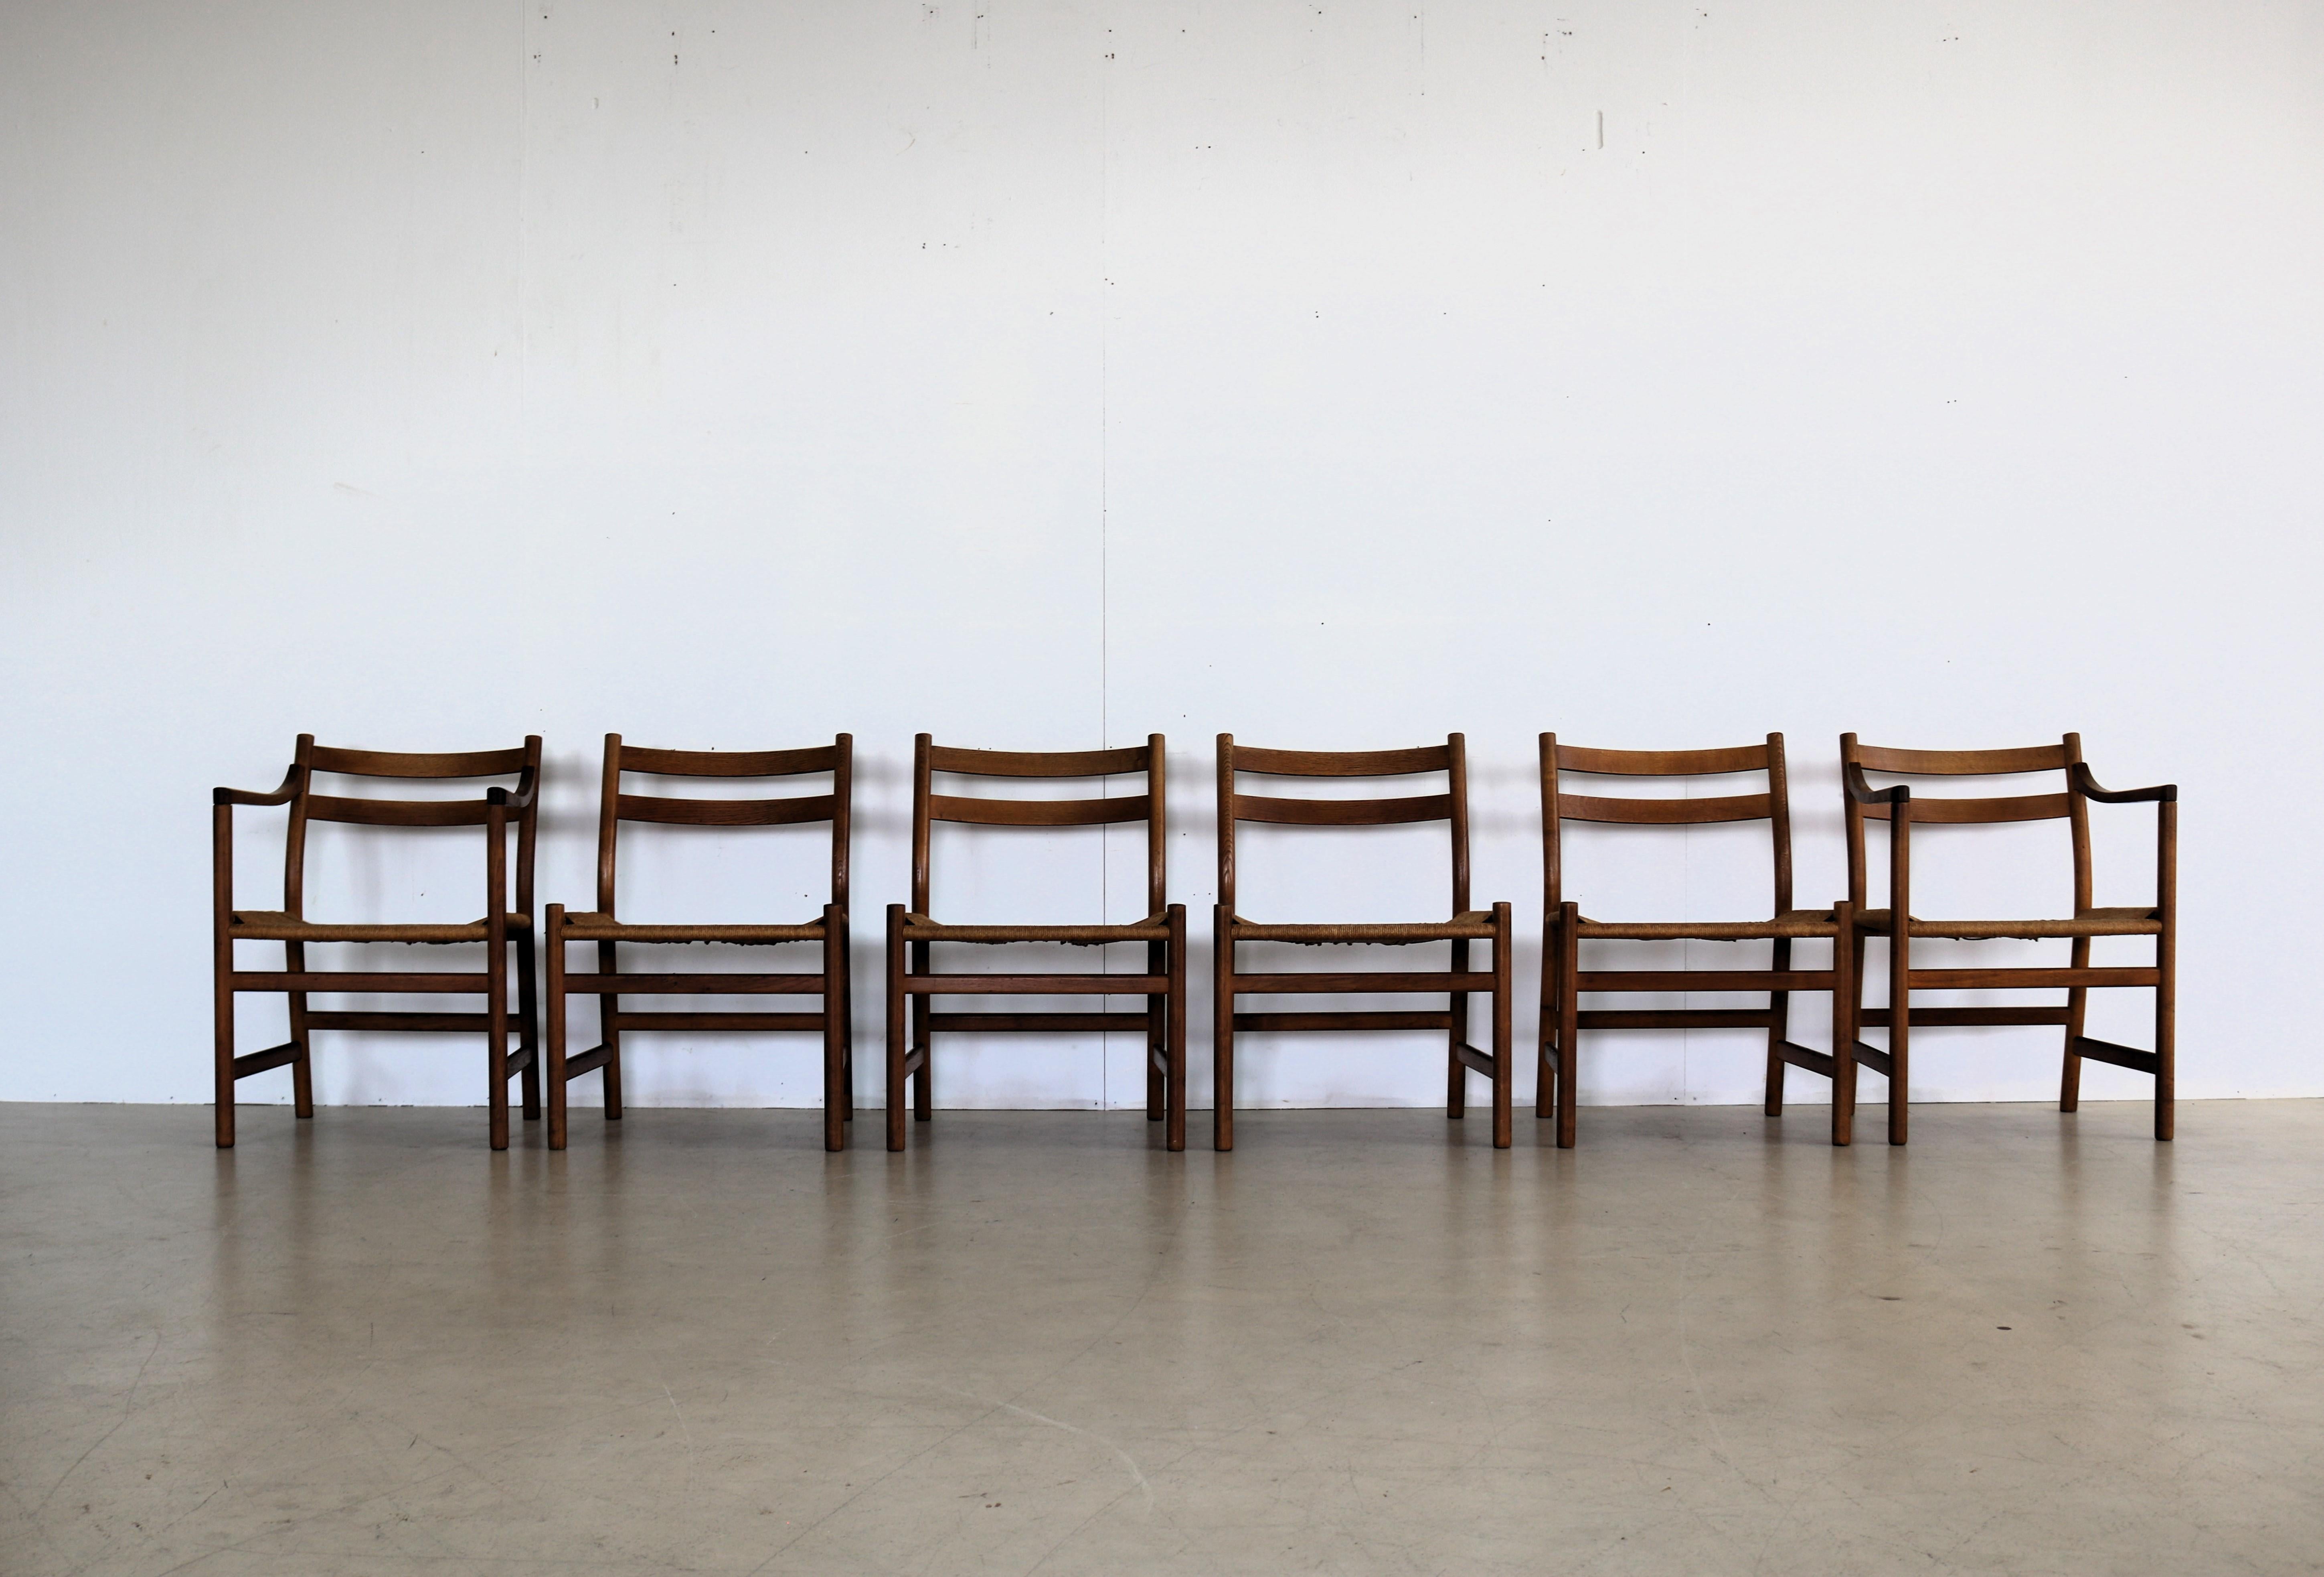 vintage dining room chairs | chairs | Hans Wegner | Danish

Set of 6 dining chairs designed by Hans Wegner for Carl Hansen & Sön. 4x model CH47 and 2x model CH46 with armrests. Can also be combined as a set with the Borge Mogensen oak dining